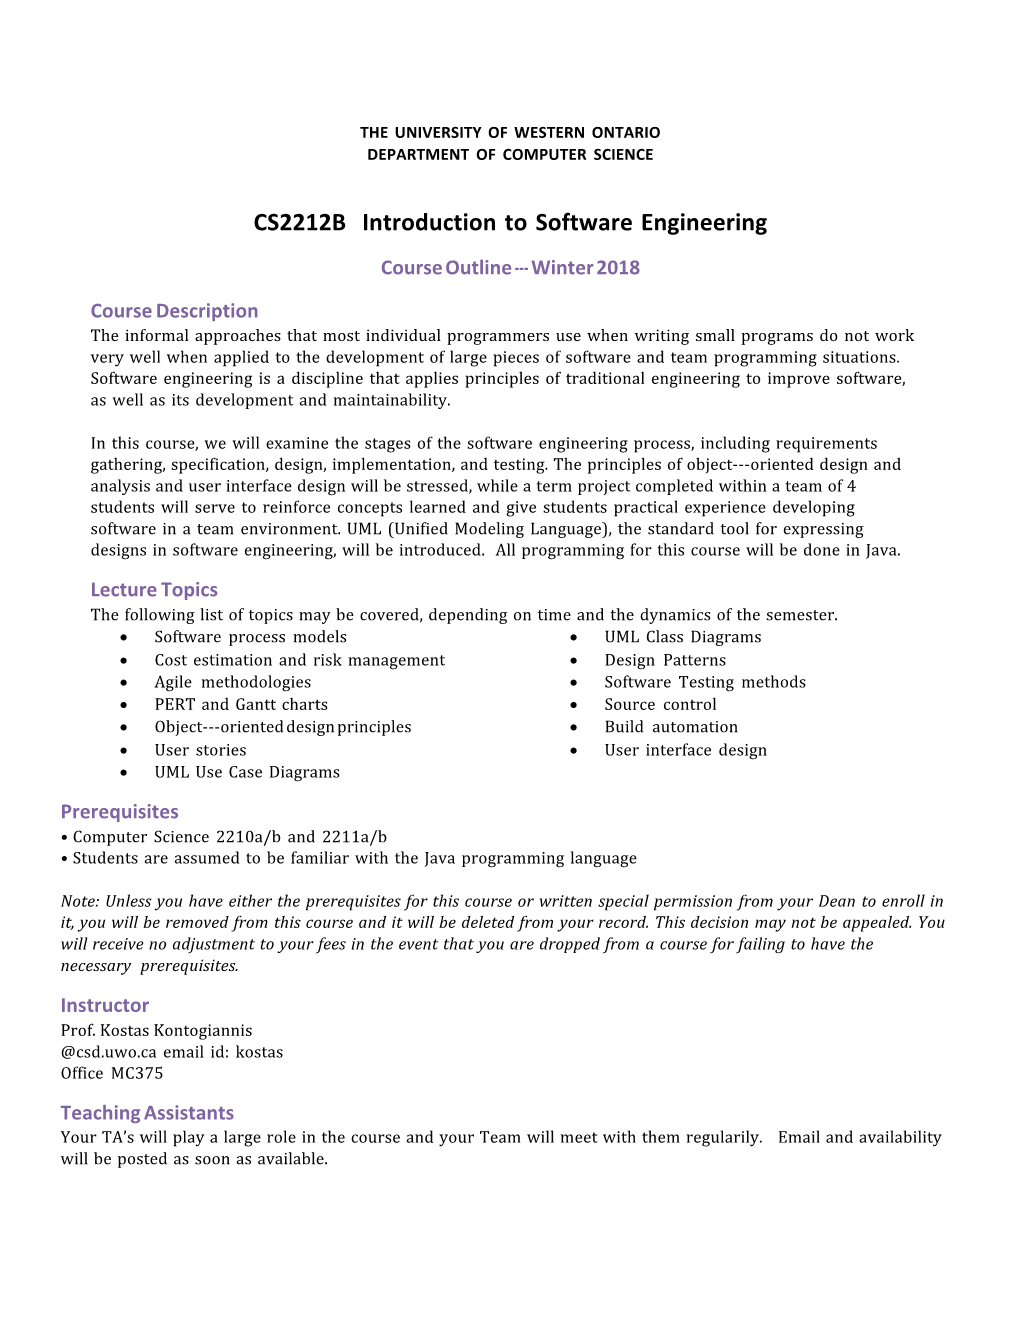 CS2212B Introduction to Software Engineering Course Outline --- Winter 2018